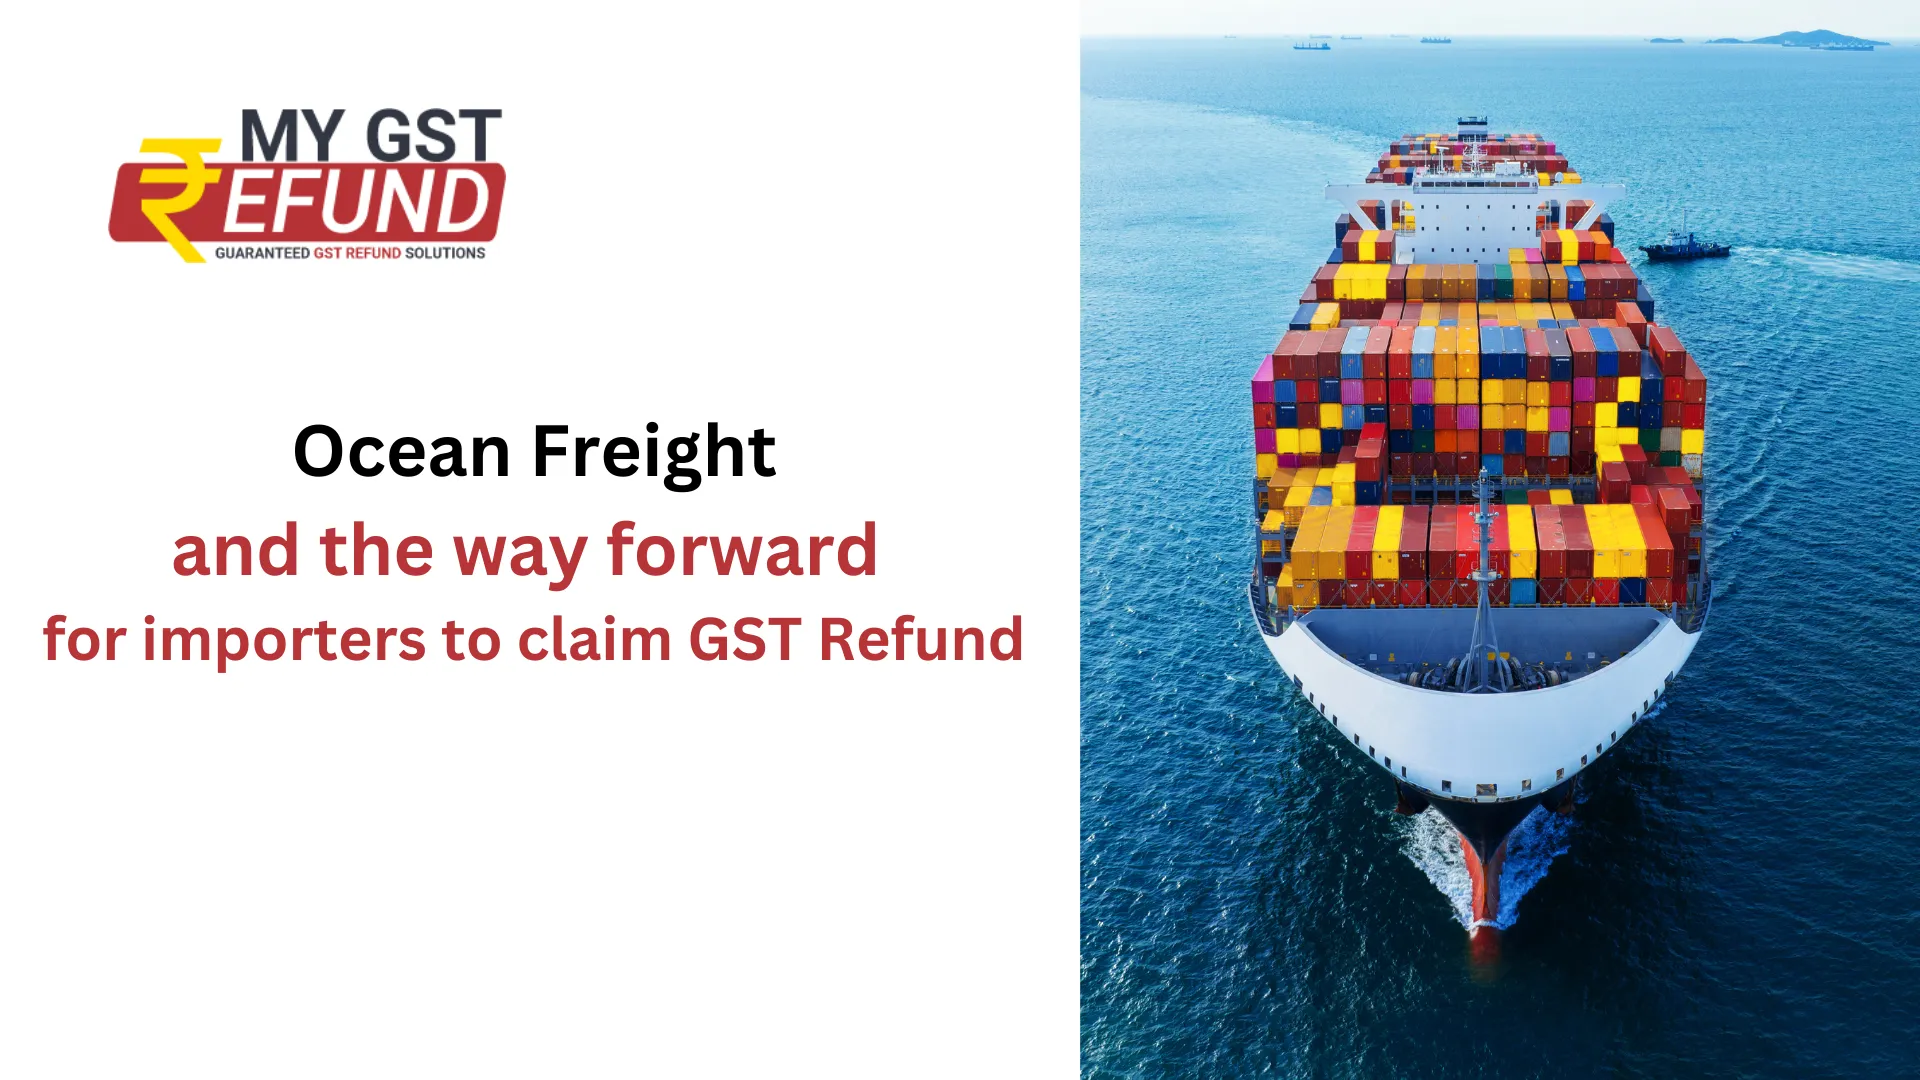 Ocean Freight and the way forward 